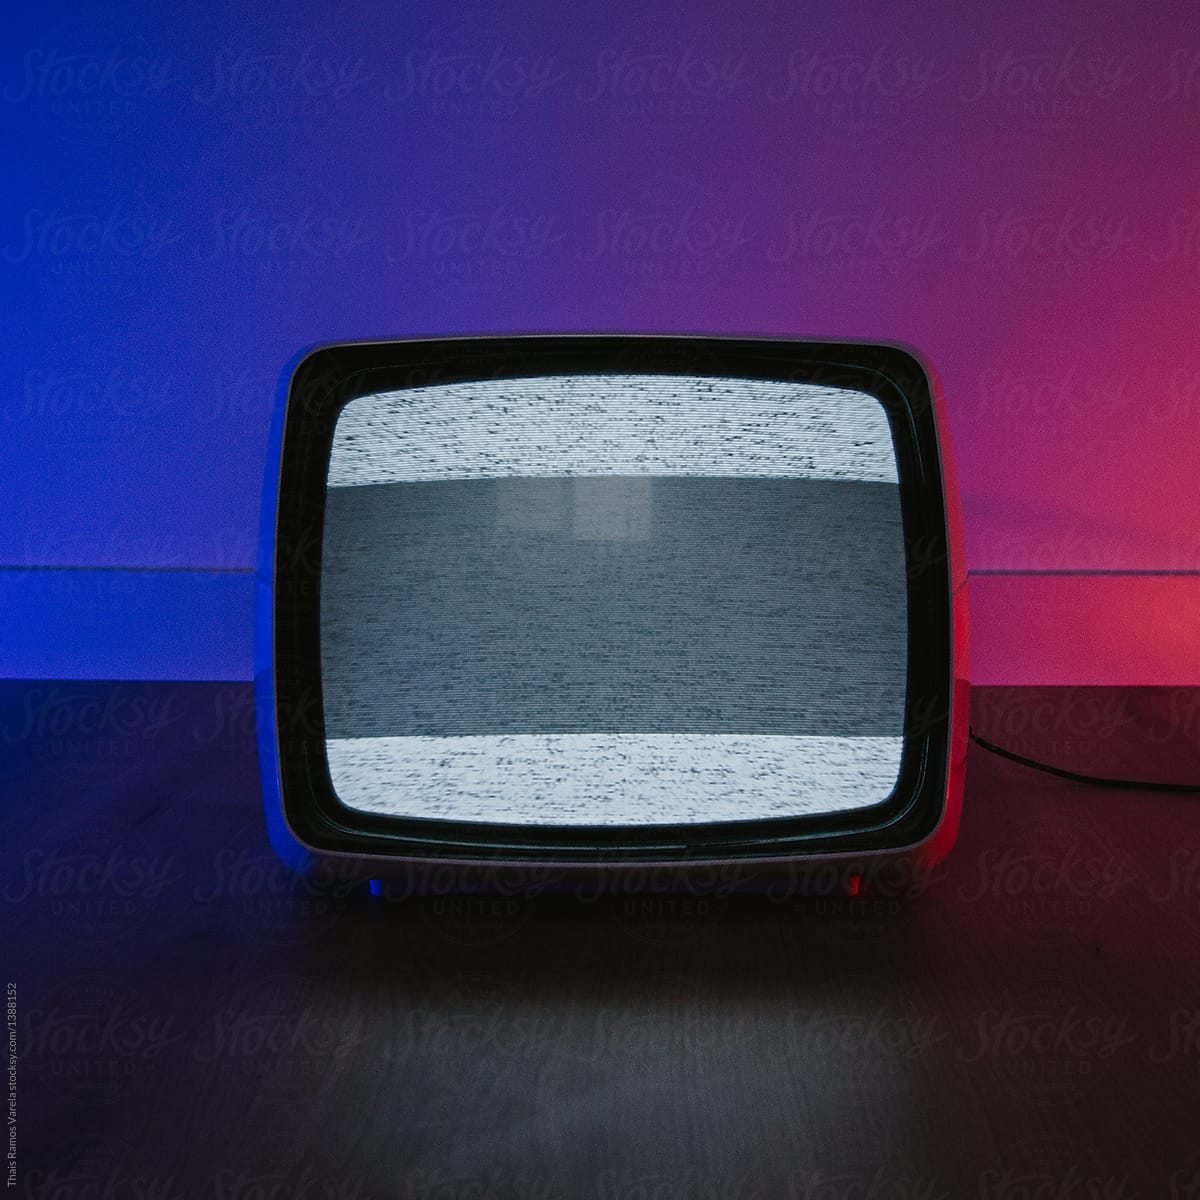 vintage television on a blue/red iluminated room